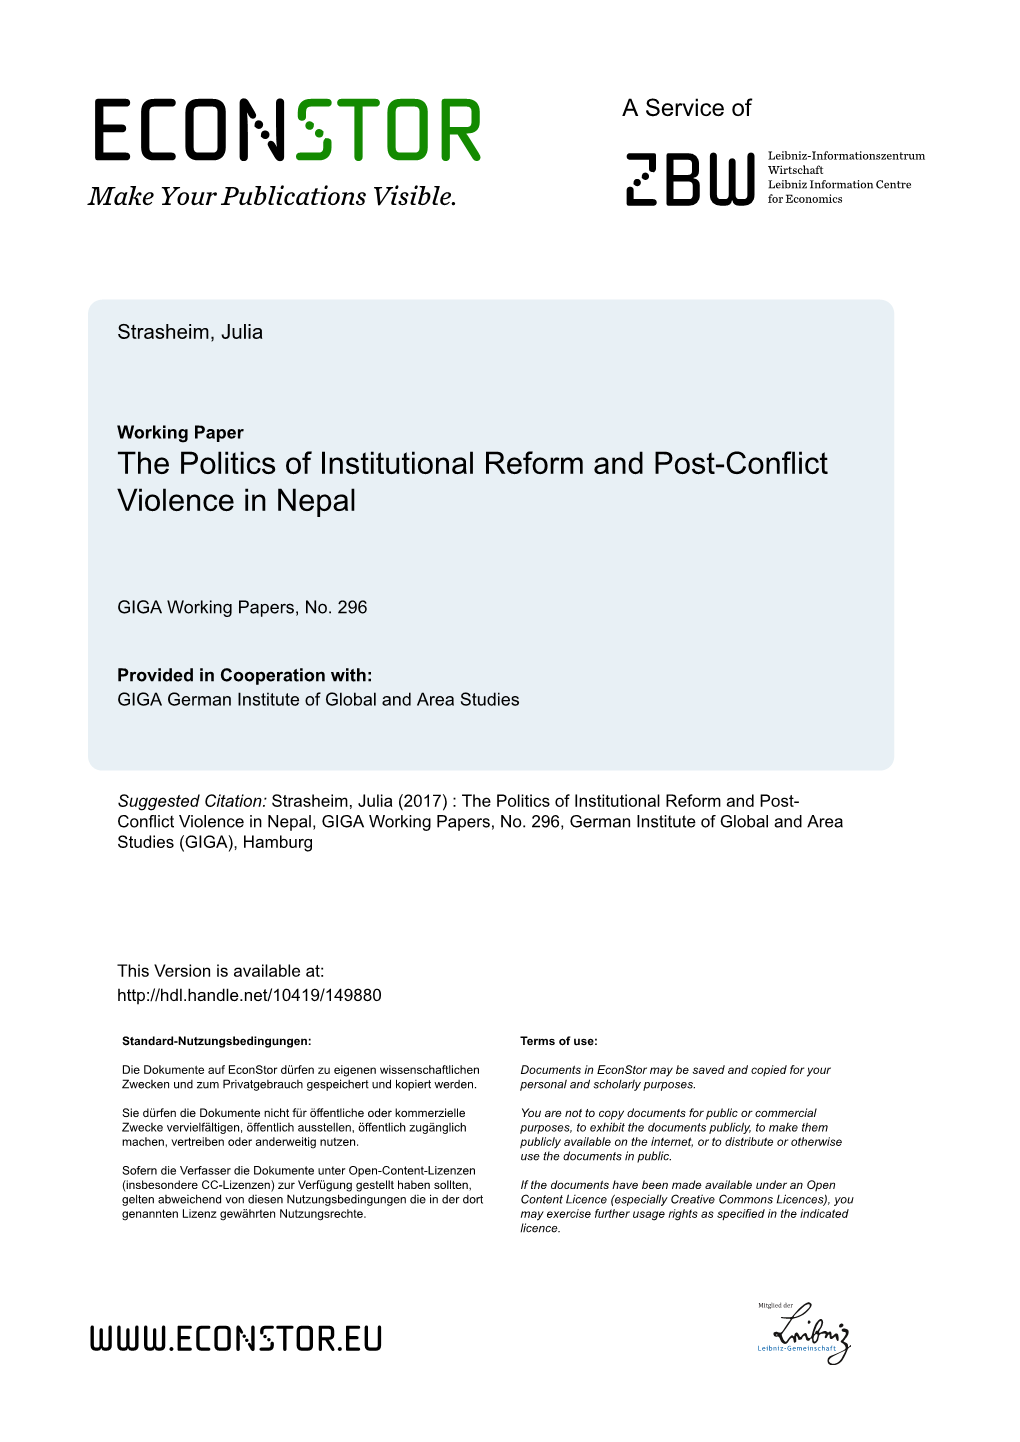 The Politics of Institutional Reform and Post-Conflict Violence in Nepal